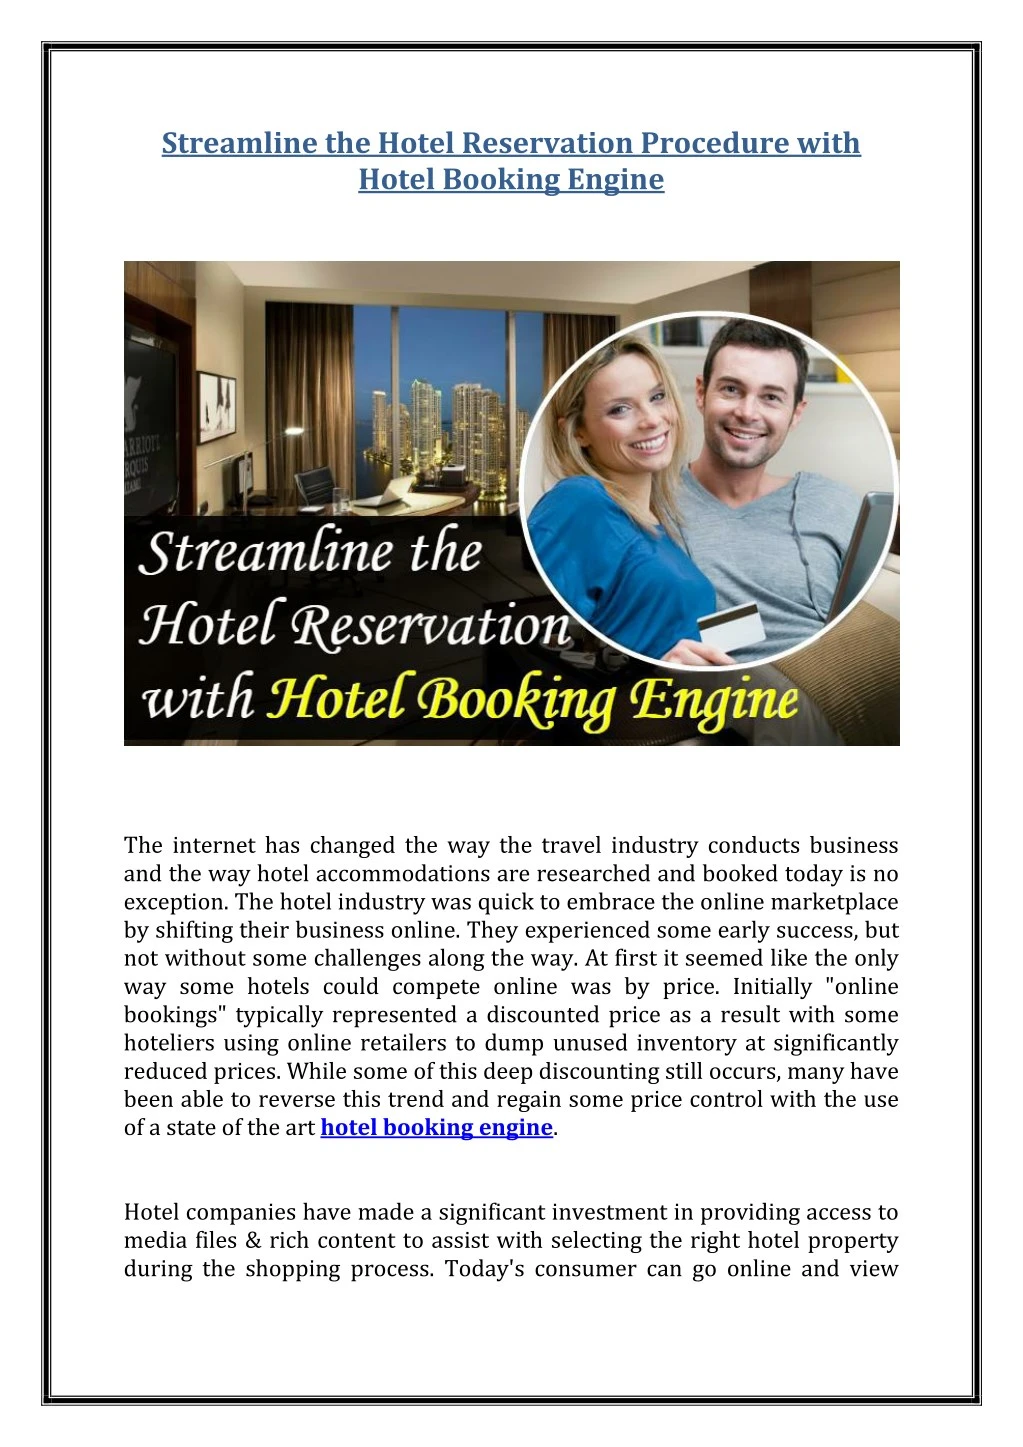 streamline the hotel reservation procedure with